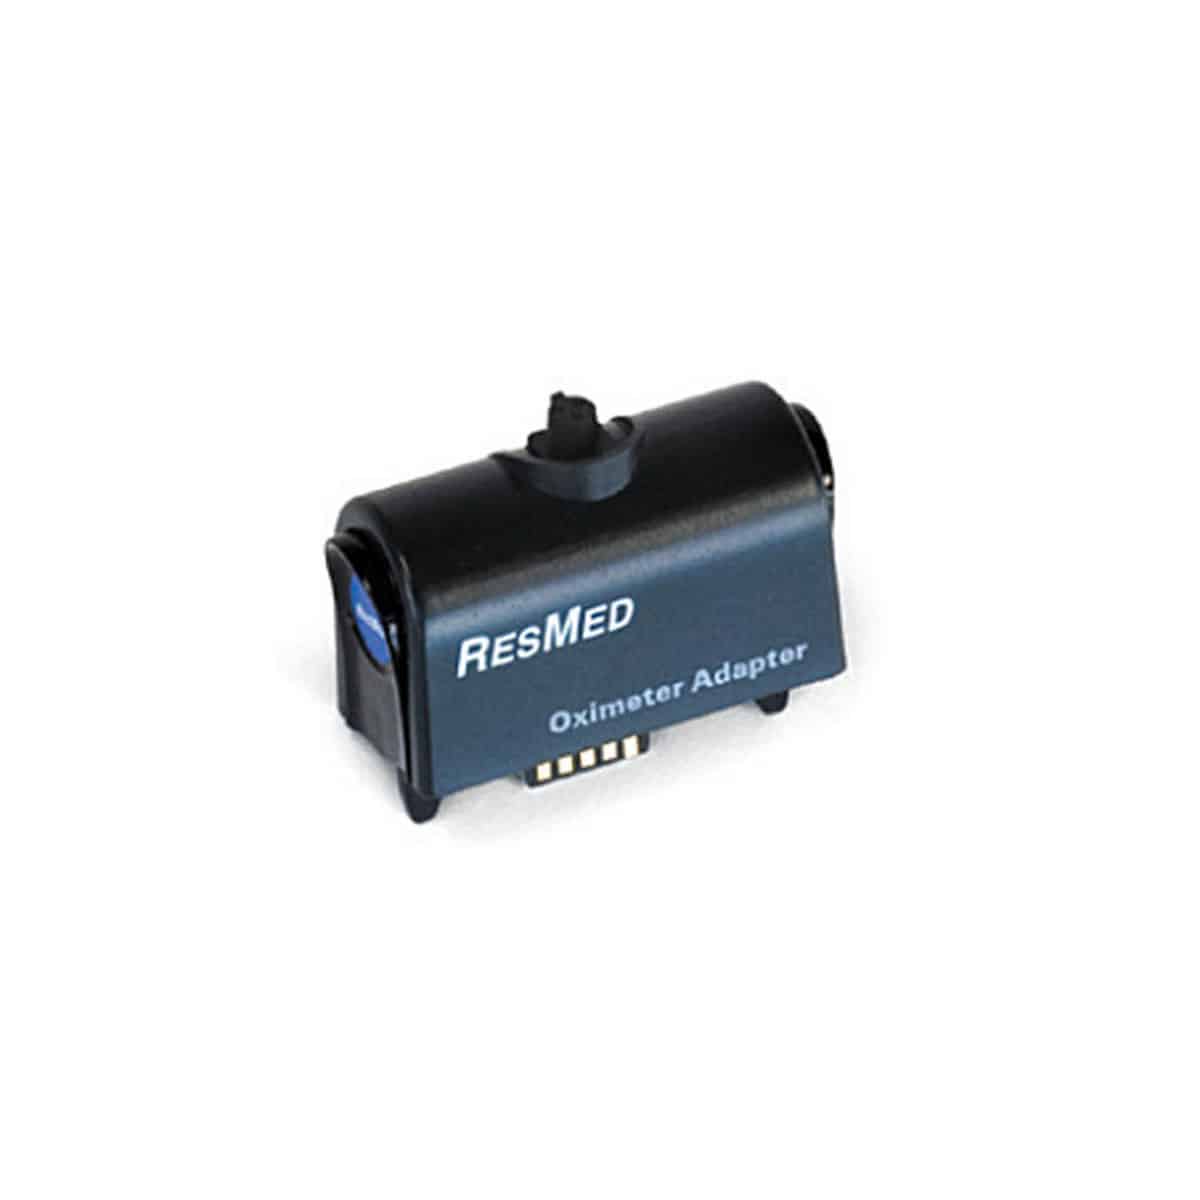 ResMed S9 Oximeter Adapter